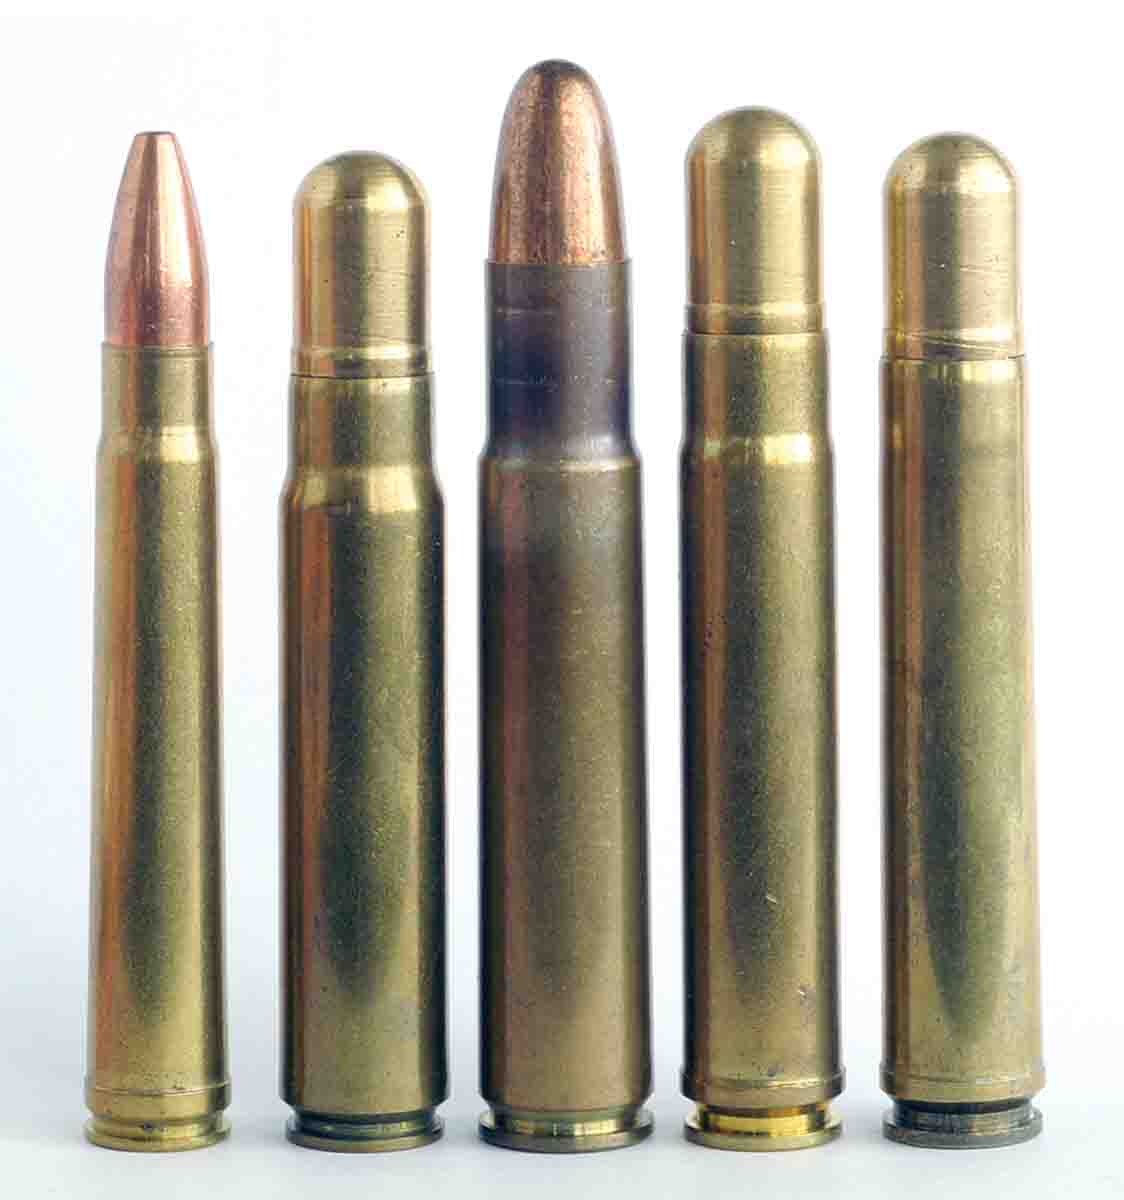 Left to right, a .375 H&H looks dainty by comparison to the .500 Jeffery, .505 Gibbs, .500 A-Square and .495 A-Square. The .500 Jeffery was made short and compact in order to fit a standard Mauser K98 action.